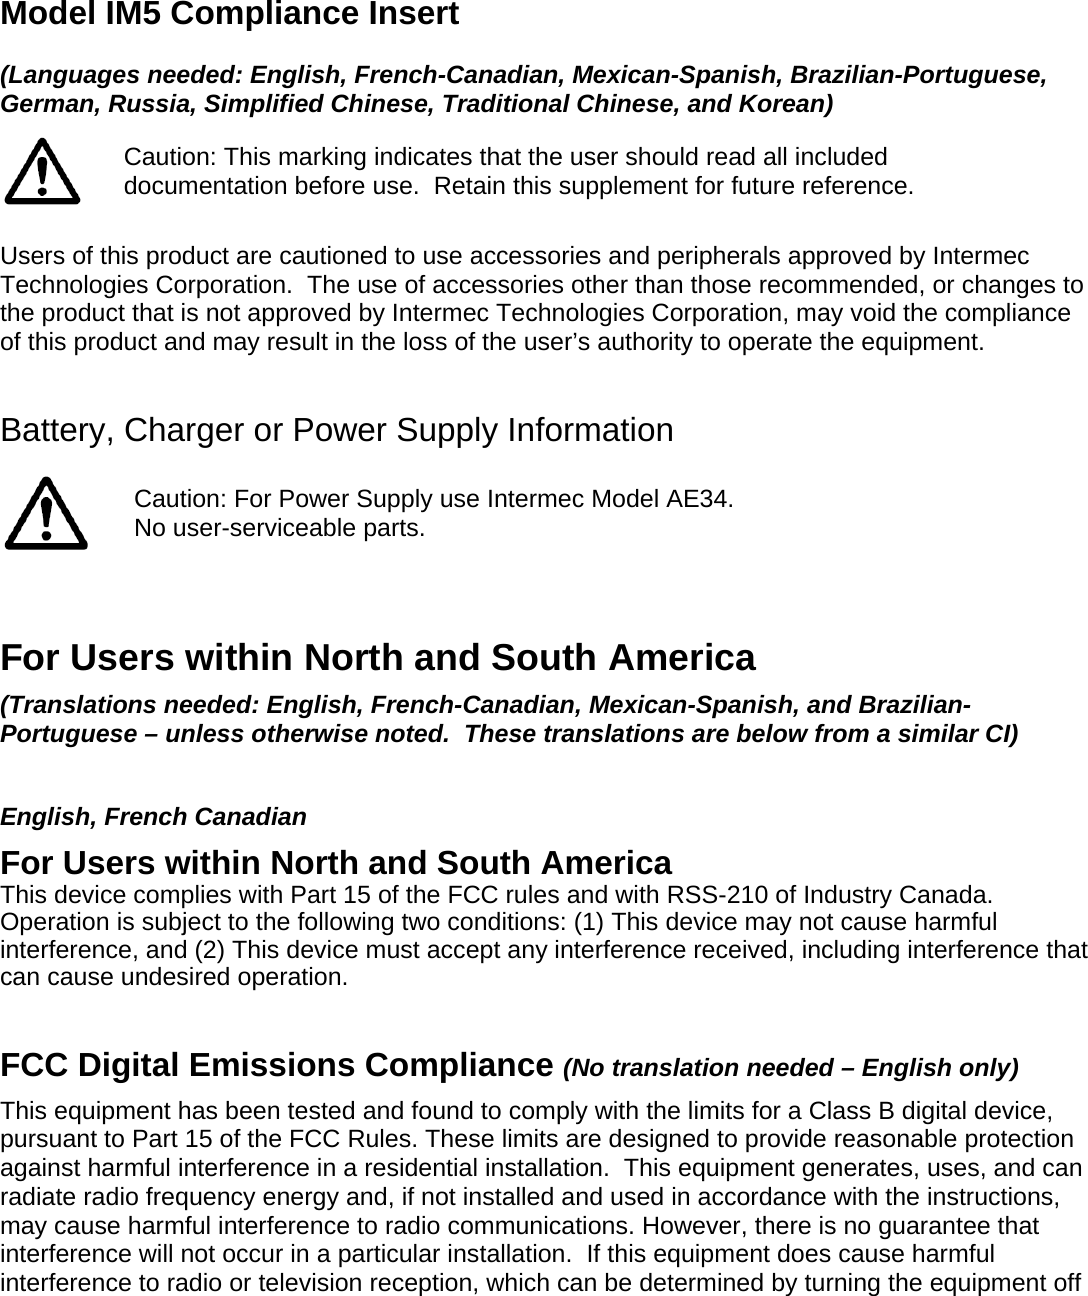 Model IM5 Compliance Insert  (Languages needed: English, French-Canadian, Mexican-Spanish, Brazilian-Portuguese, German, Russia, Simplified Chinese, Traditional Chinese, and Korean)  Caution: This marking indicates that the user should read all included documentation before use.  Retain this supplement for future reference.  Users of this product are cautioned to use accessories and peripherals approved by Intermec Technologies Corporation.  The use of accessories other than those recommended, or changes to the product that is not approved by Intermec Technologies Corporation, may void the compliance of this product and may result in the loss of the user’s authority to operate the equipment.  Battery, Charger or Power Supply Information   Caution: For Power Supply use Intermec Model AE34. No user-serviceable parts.   For Users within North and South America (Translations needed: English, French-Canadian, Mexican-Spanish, and Brazilian-Portuguese – unless otherwise noted.  These translations are below from a similar CI)   English, French Canadian For Users within North and South America This device complies with Part 15 of the FCC rules and with RSS-210 of Industry Canada. Operation is subject to the following two conditions: (1) This device may not cause harmful interference, and (2) This device must accept any interference received, including interference that can cause undesired operation.   FCC Digital Emissions Compliance (No translation needed – English only) This equipment has been tested and found to comply with the limits for a Class B digital device, pursuant to Part 15 of the FCC Rules. These limits are designed to provide reasonable protection against harmful interference in a residential installation.  This equipment generates, uses, and can radiate radio frequency energy and, if not installed and used in accordance with the instructions, may cause harmful interference to radio communications. However, there is no guarantee that interference will not occur in a particular installation.  If this equipment does cause harmful interference to radio or television reception, which can be determined by turning the equipment off 